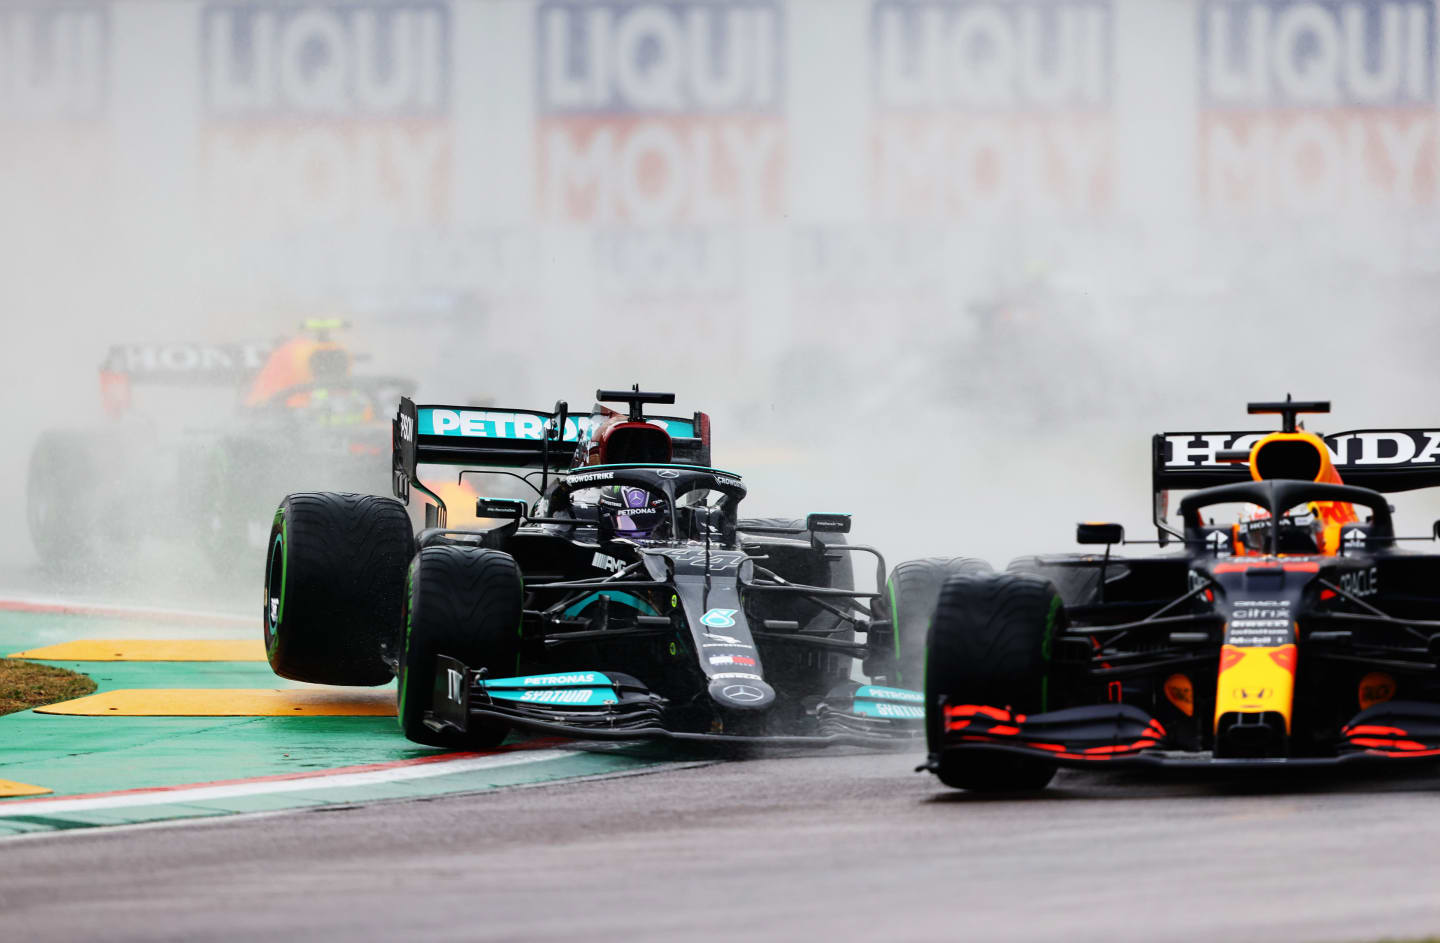 IMOLA, ITALY - APRIL 18: Lewis Hamilton of Great Britain driving the (44) Mercedes AMG Petronas F1